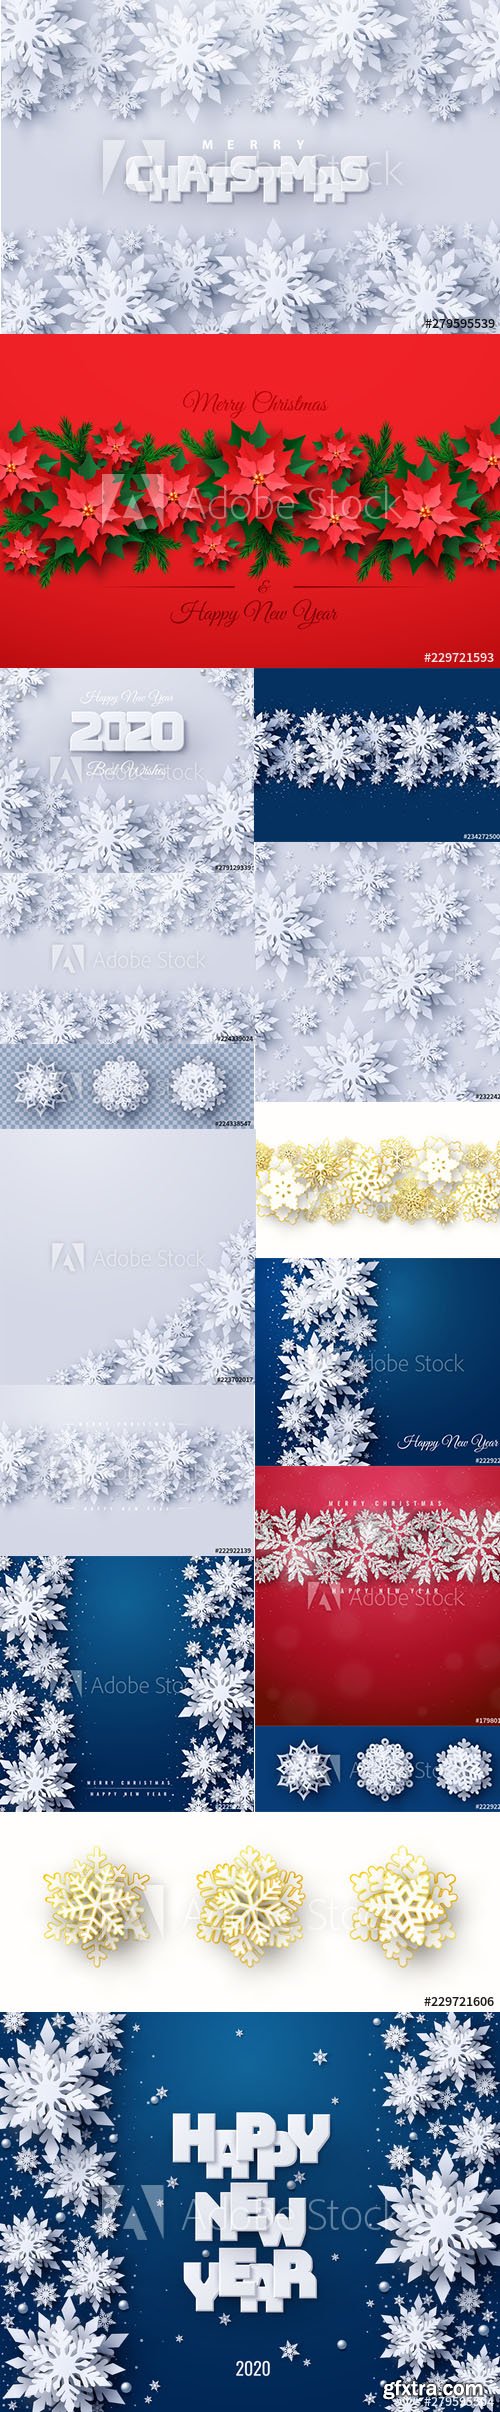 Vector set of New Year 2020 and Christmas Design Backgrounds Vol3